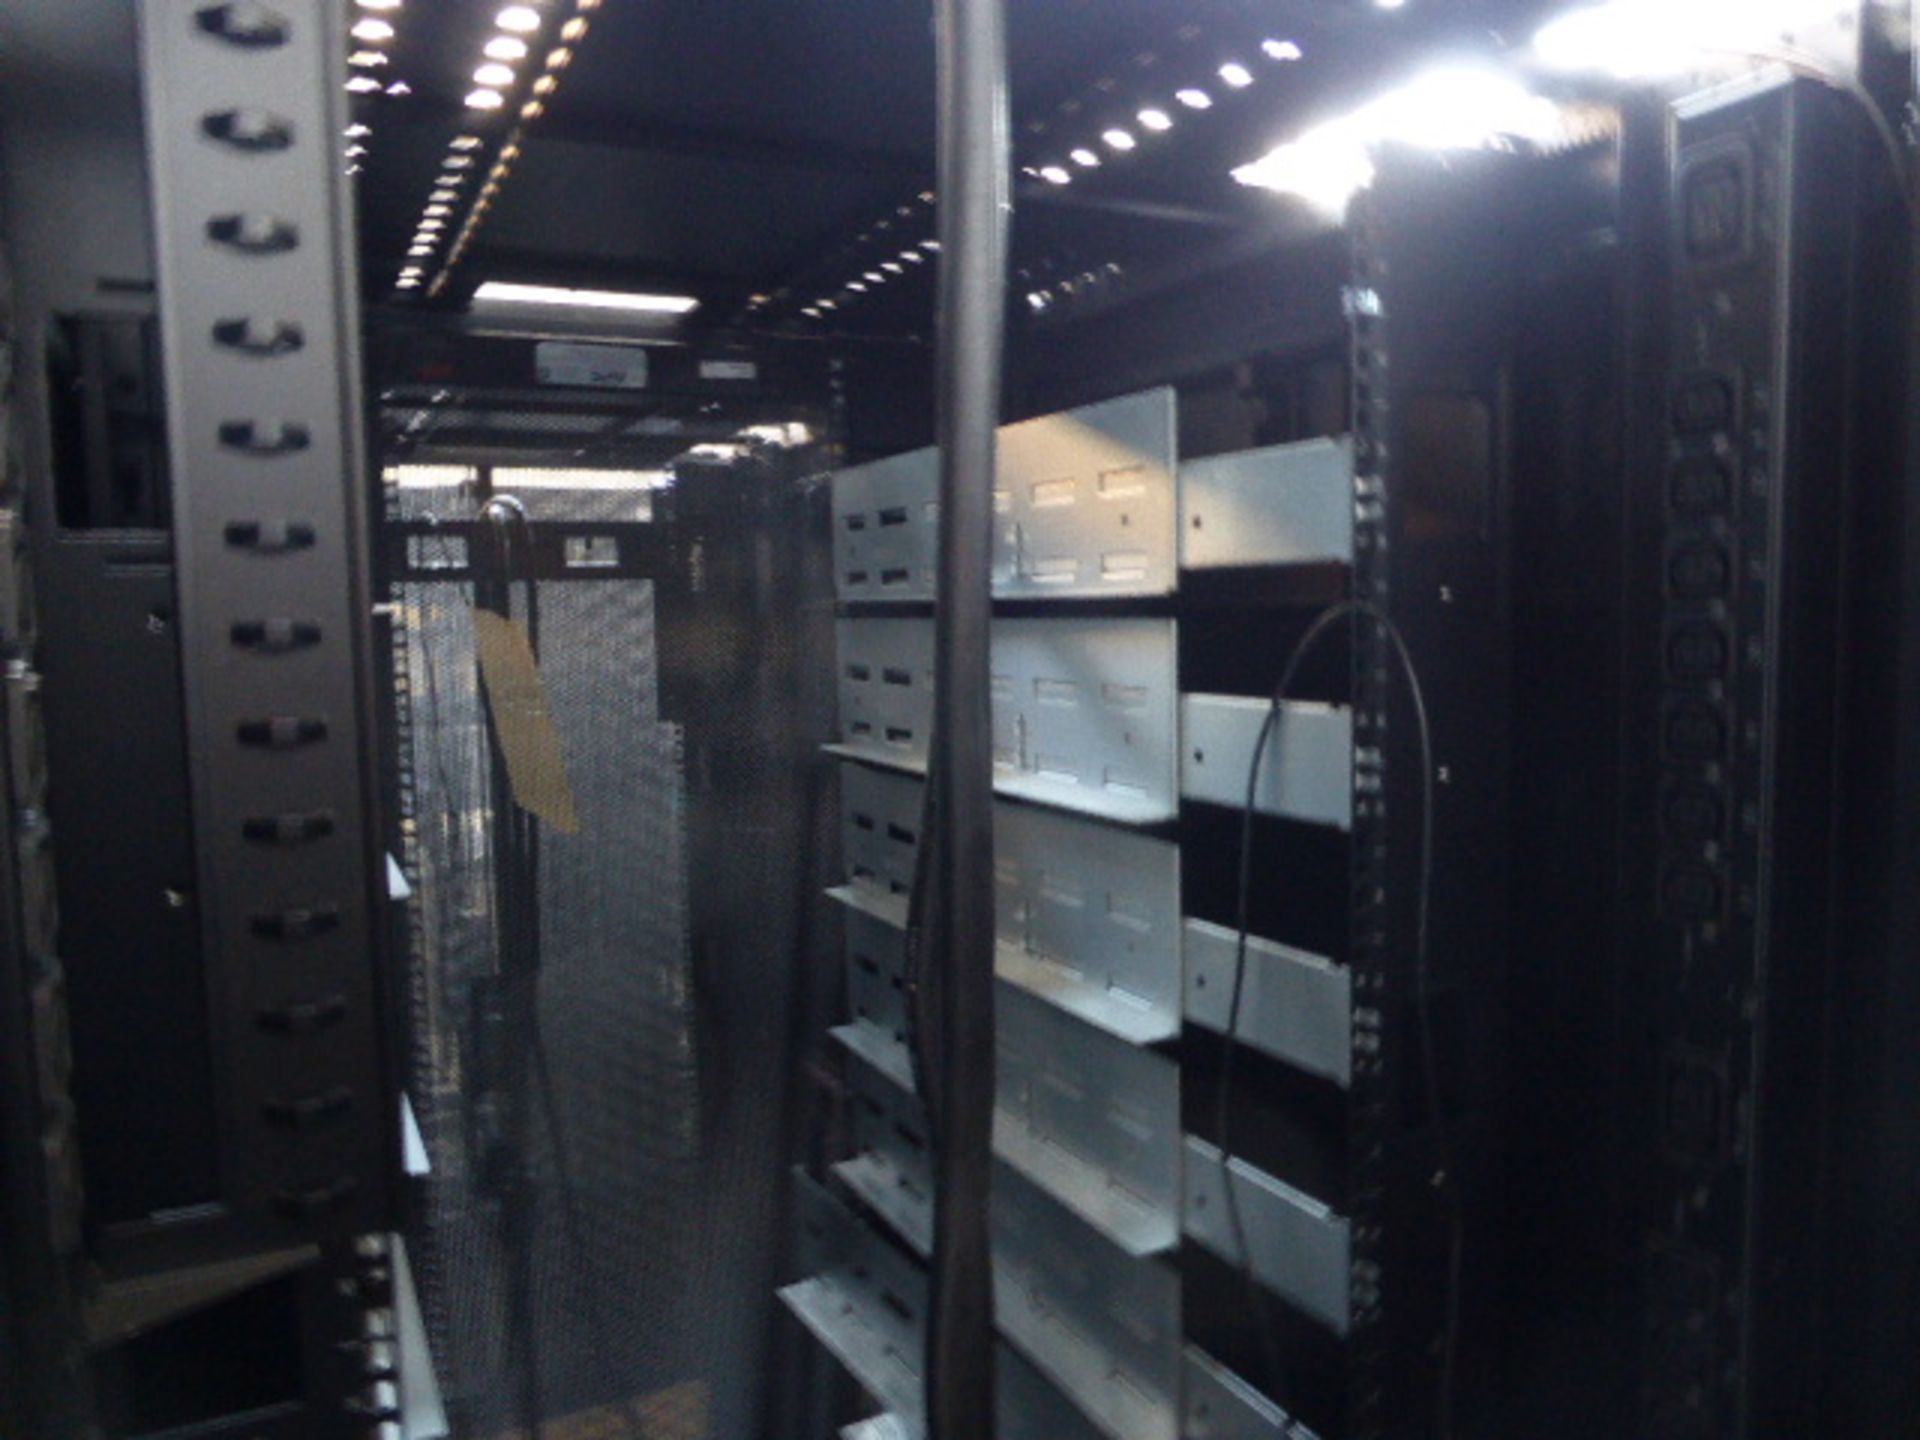 APC server cabinet on castors 75cm wide with 2 APC switch rack PDU units each with 24 outputs on - Image 2 of 2